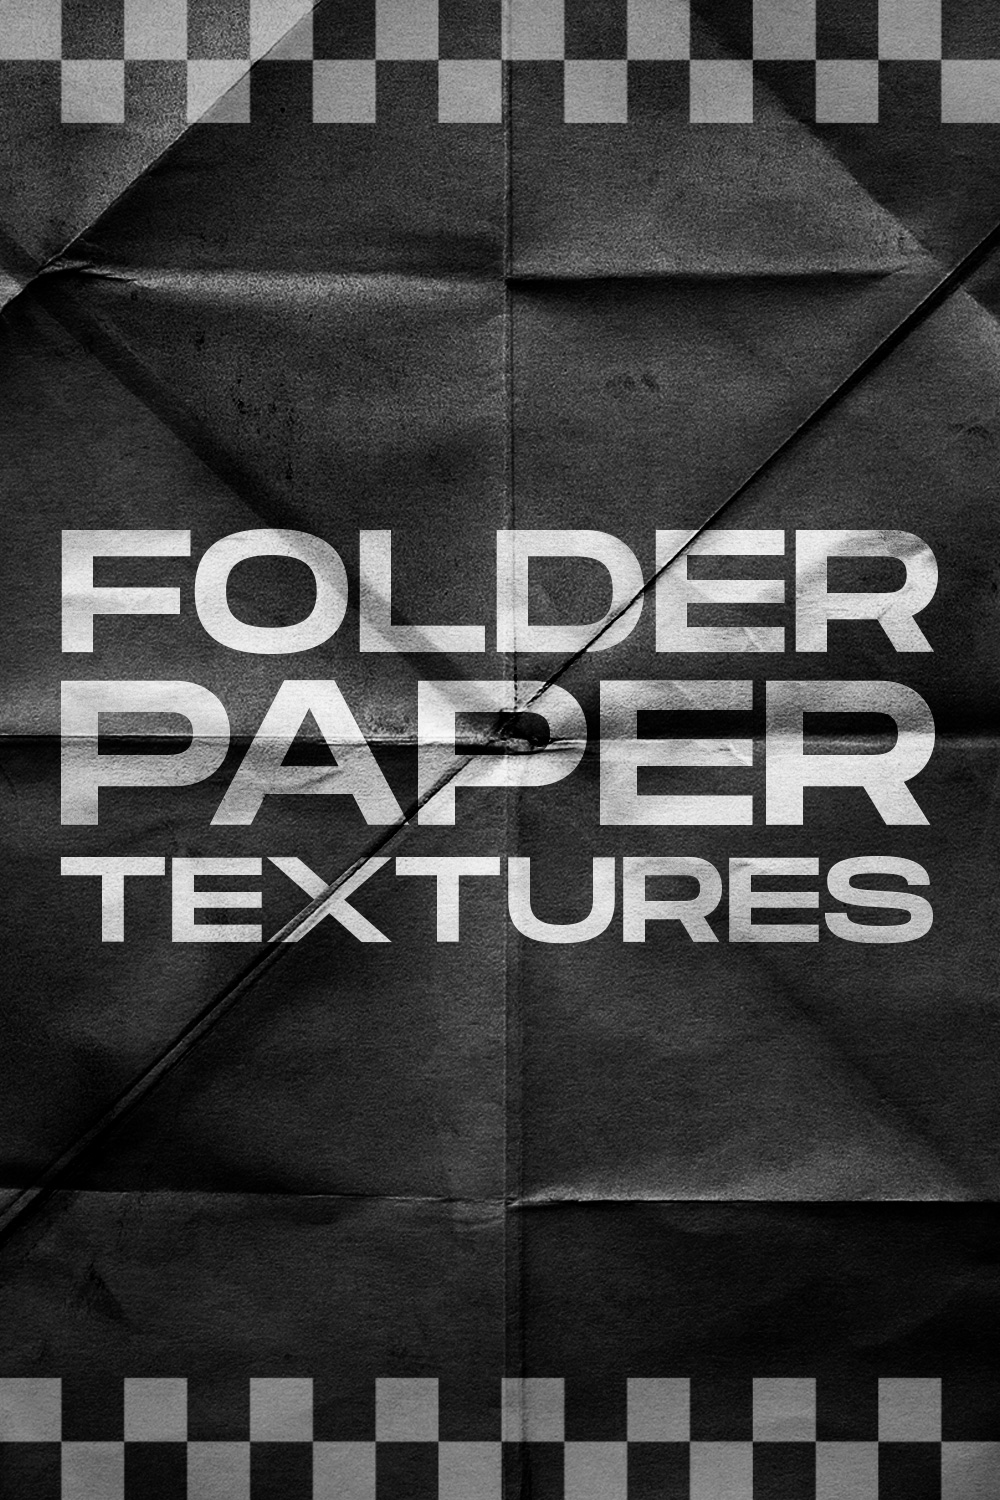 Folded Paper Textures Collection Pinterest image.